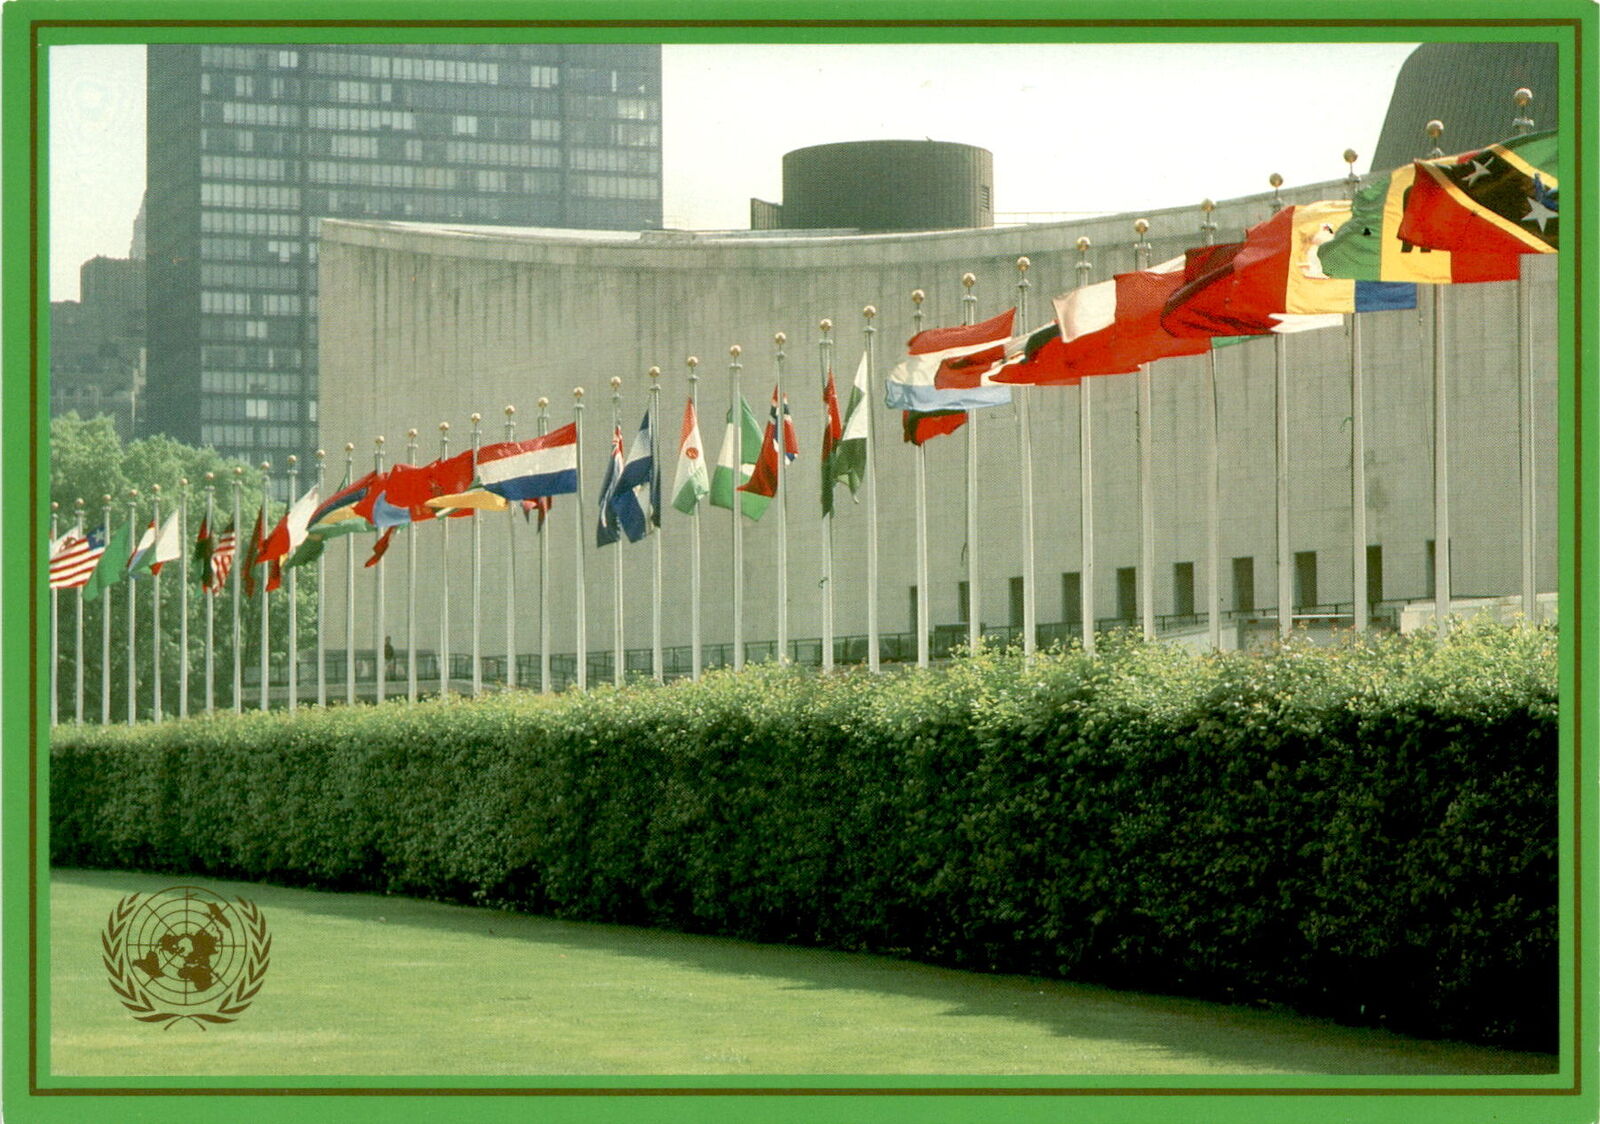 United Nations postcard with member states\' flags. Valued at 15 cents.